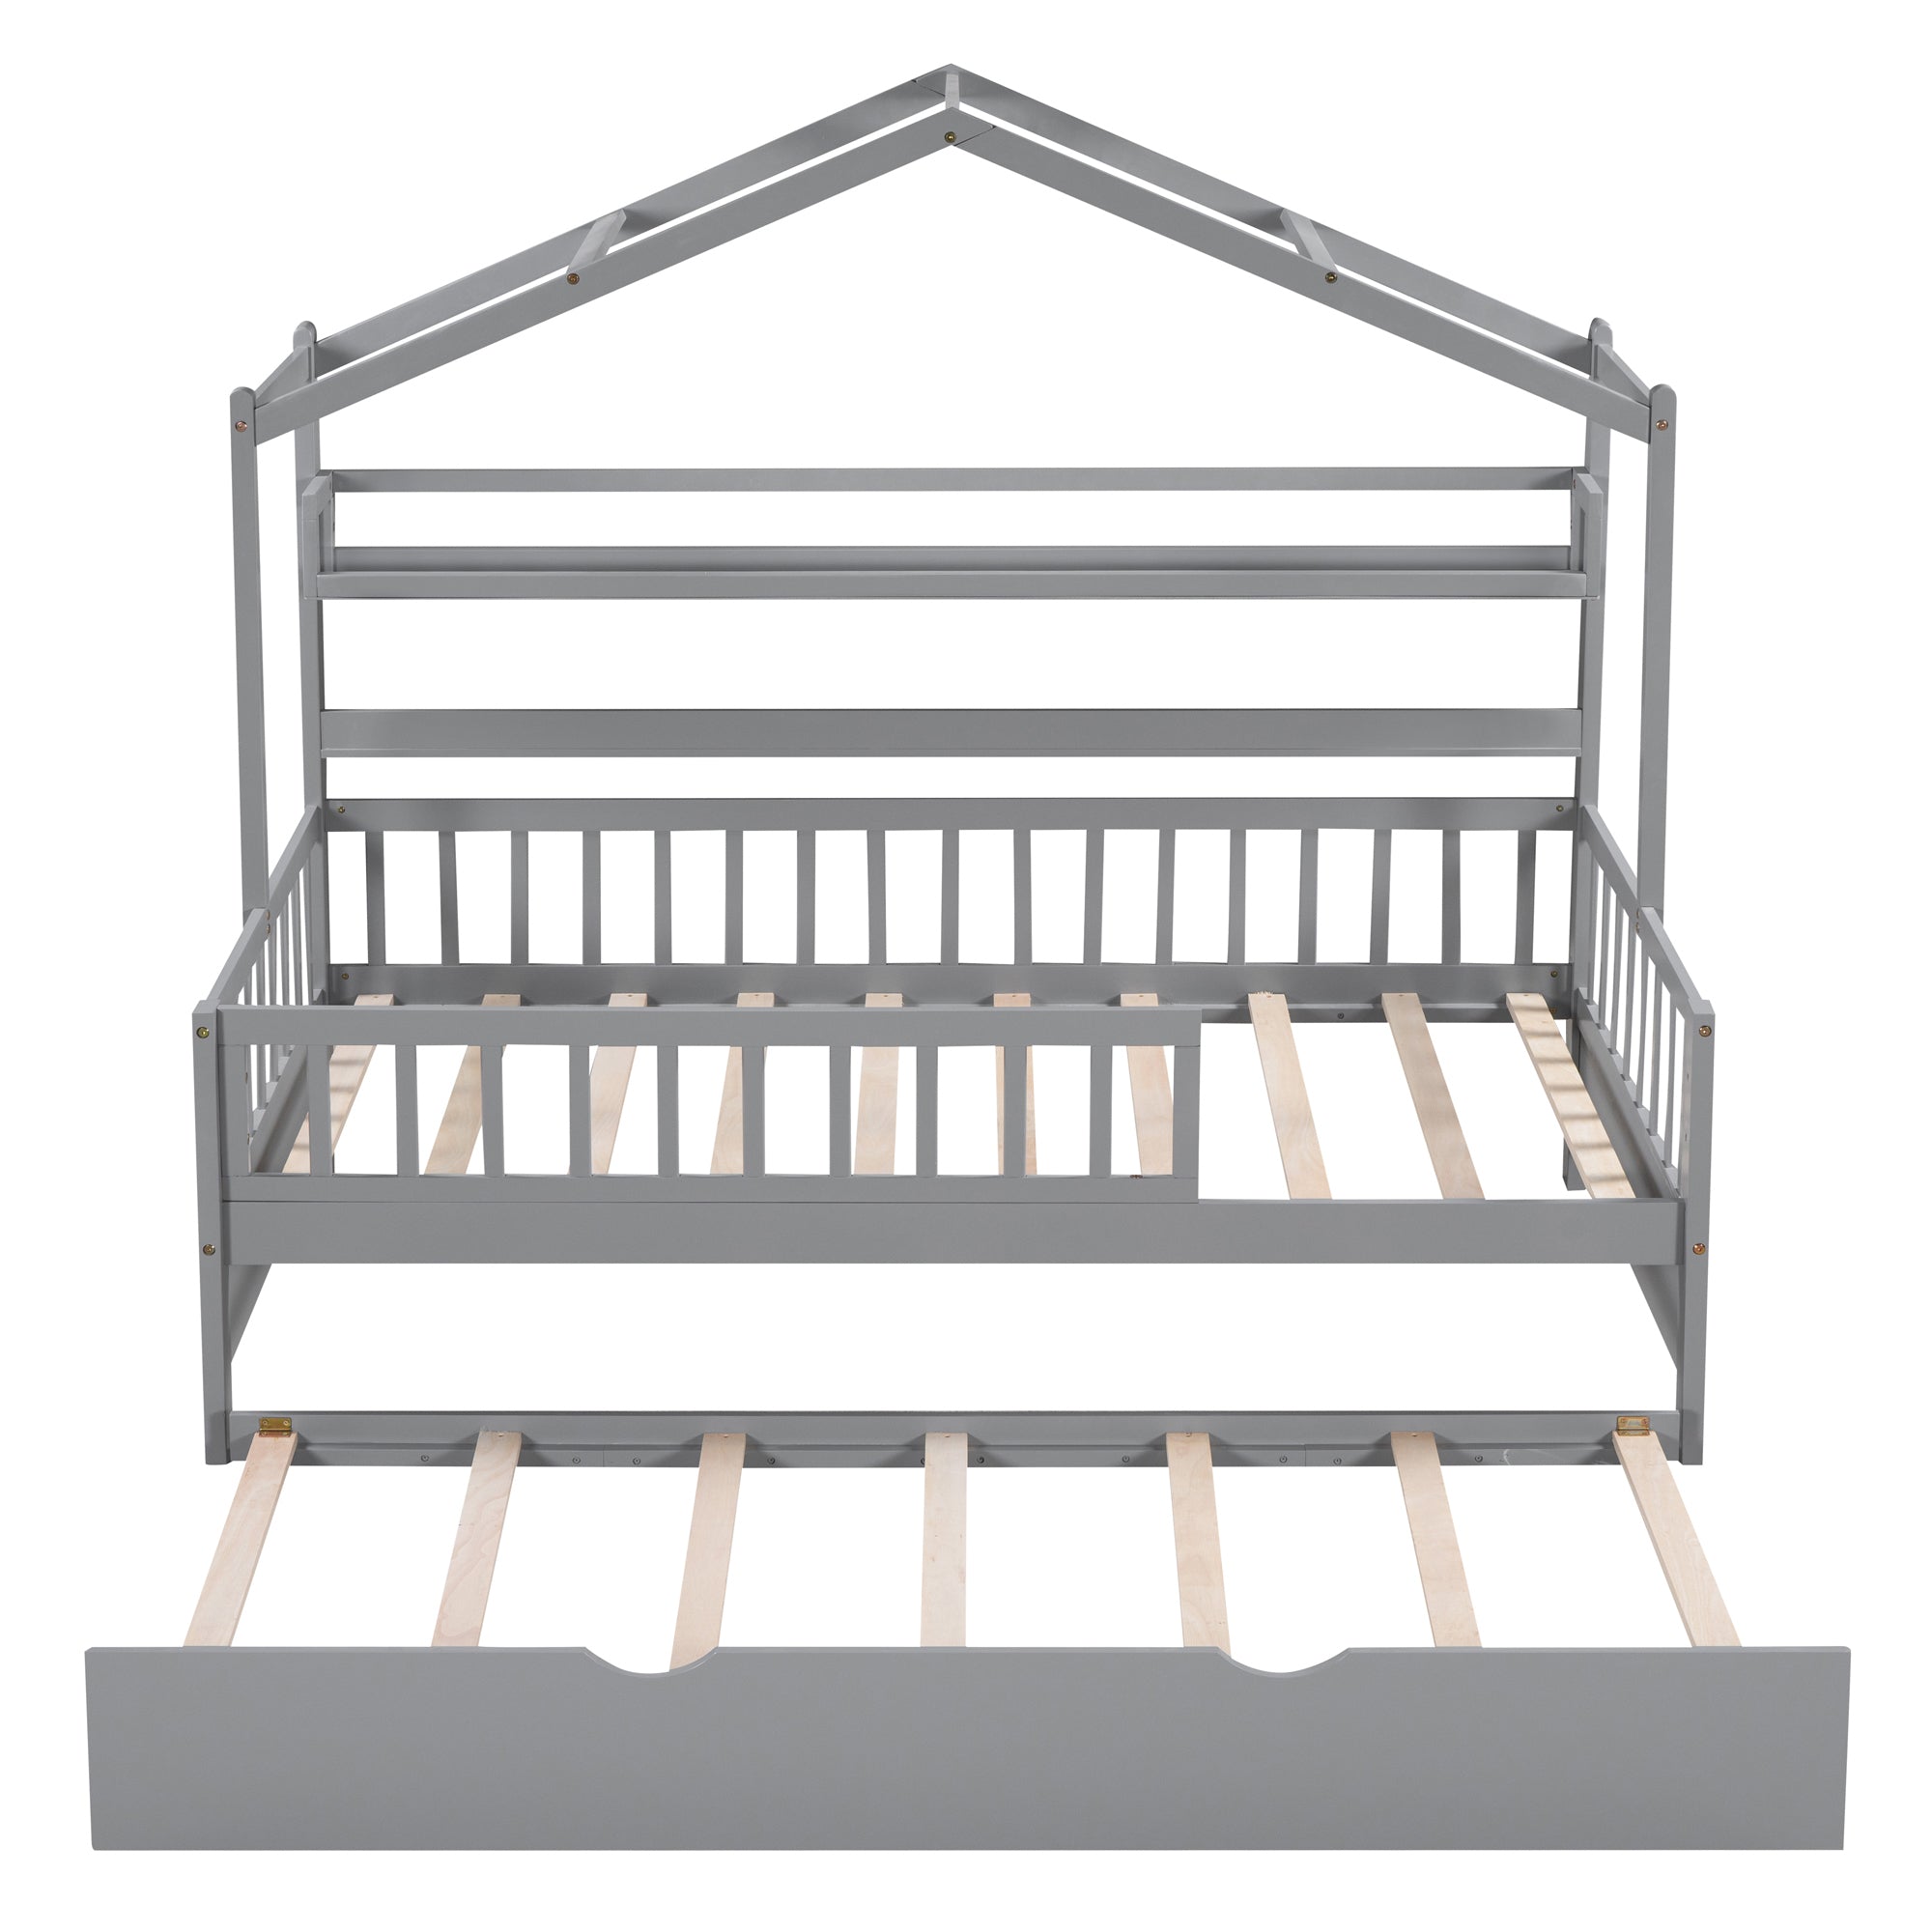 ZNTS Wooden Twin Size House Bed with Trundle,Kids Bed with Shelf, Gray WF301682AAE